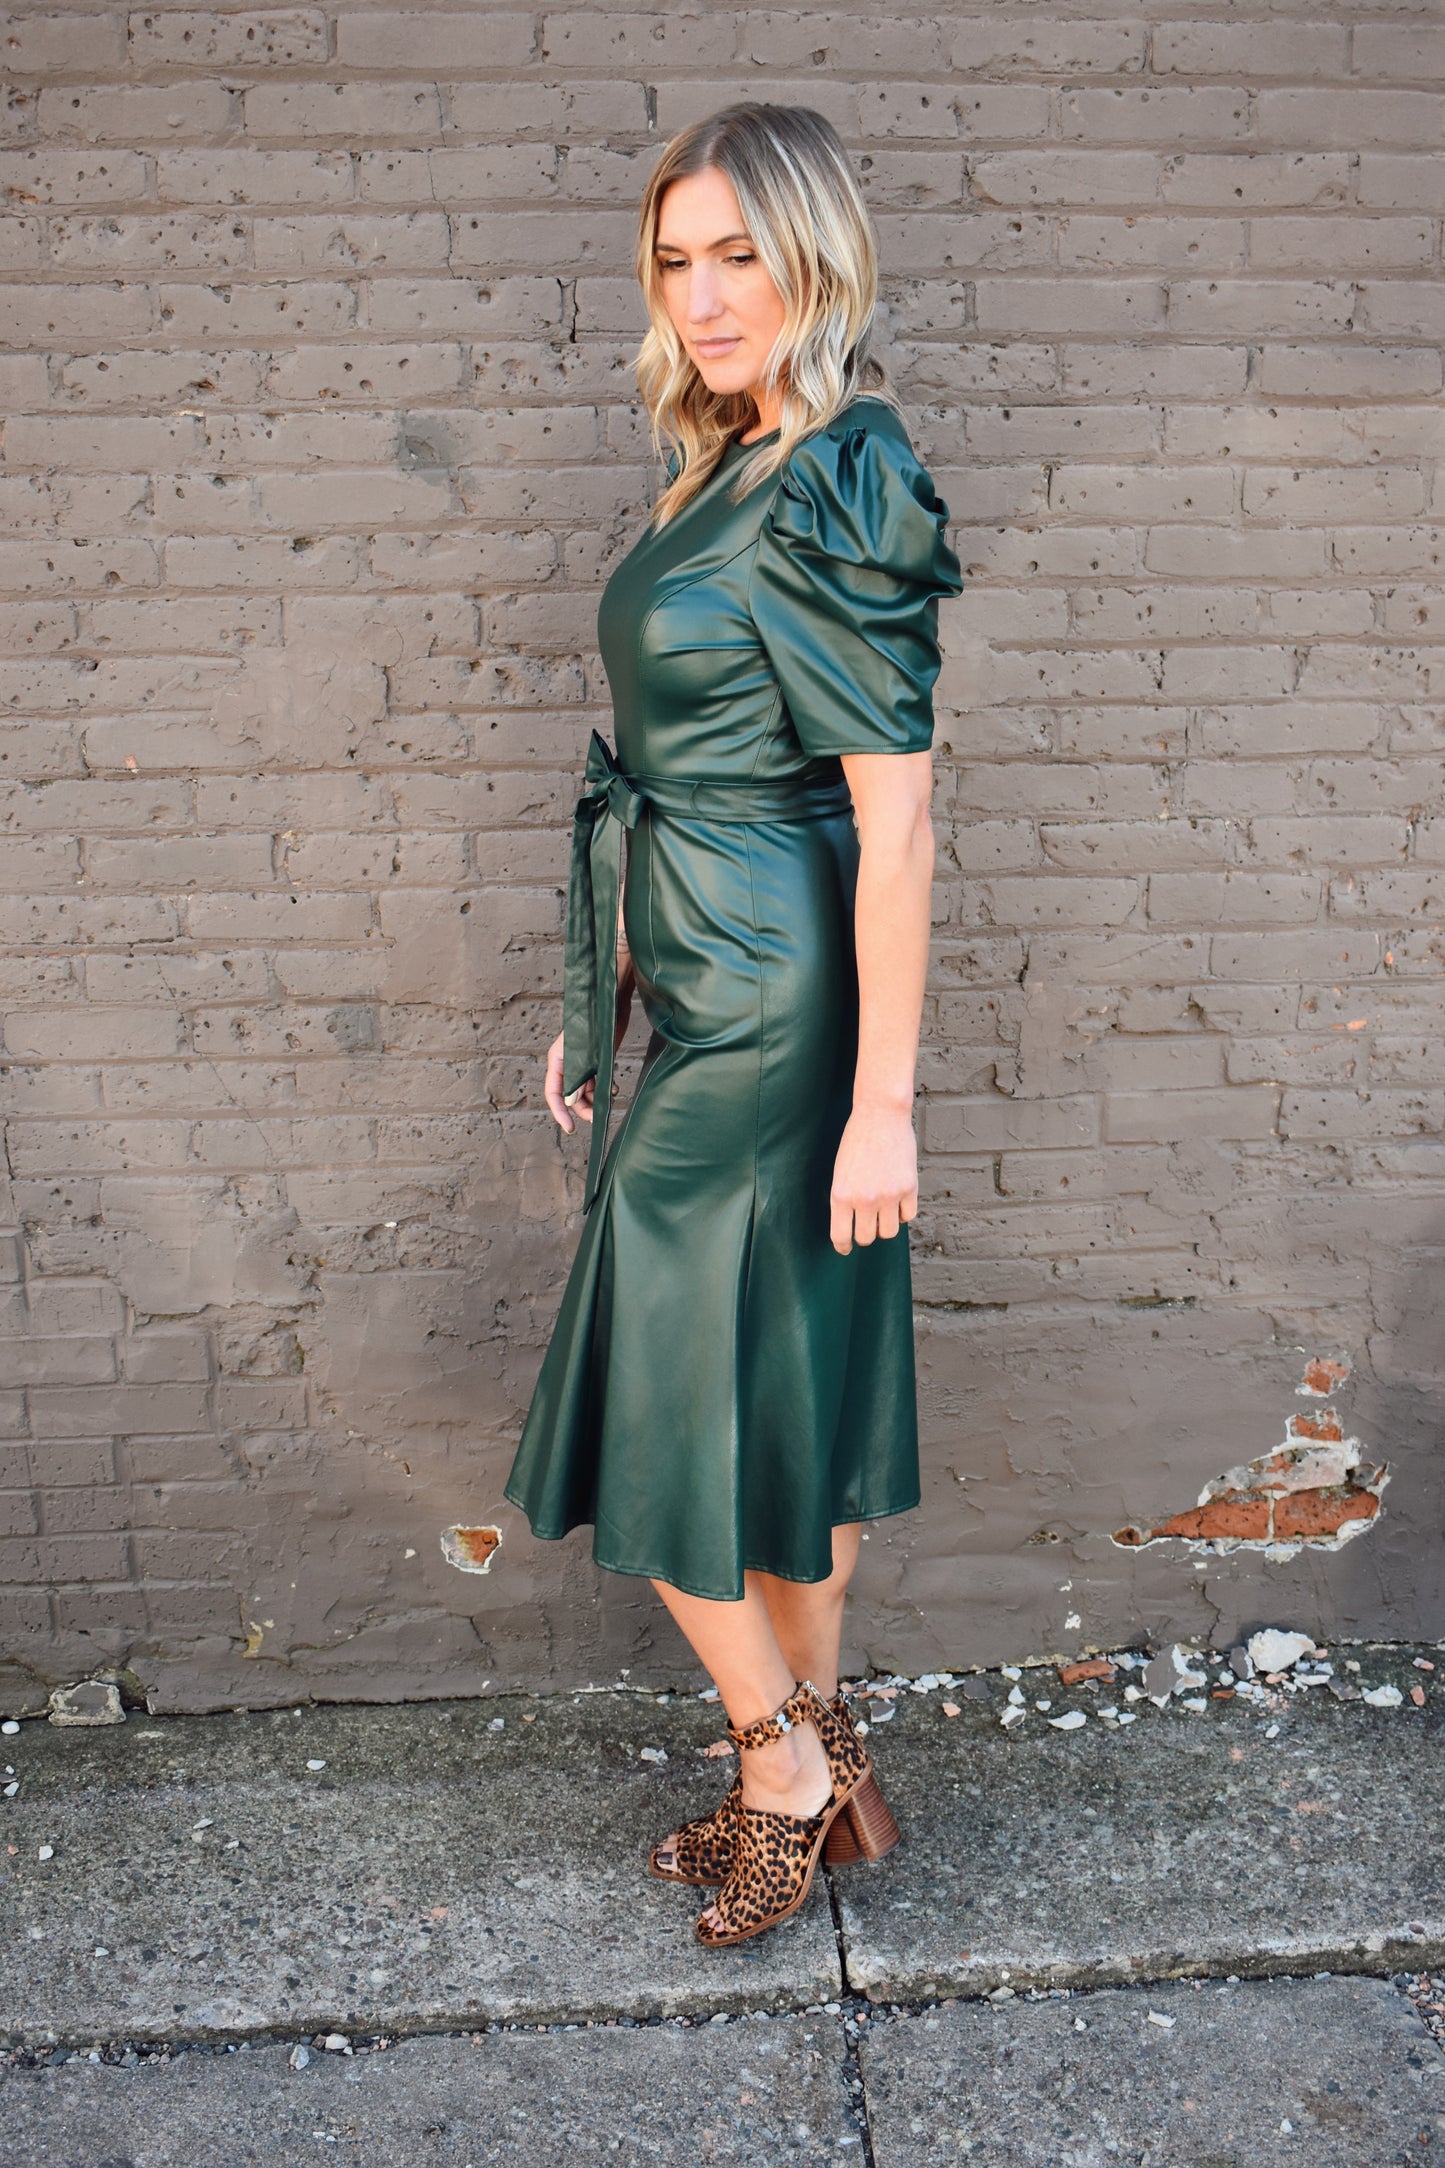 bold dark green faux leather midi dress fitted with slight flare at bottom. Short puff sleeves, crew neck, self tie waist, zipper enclosure